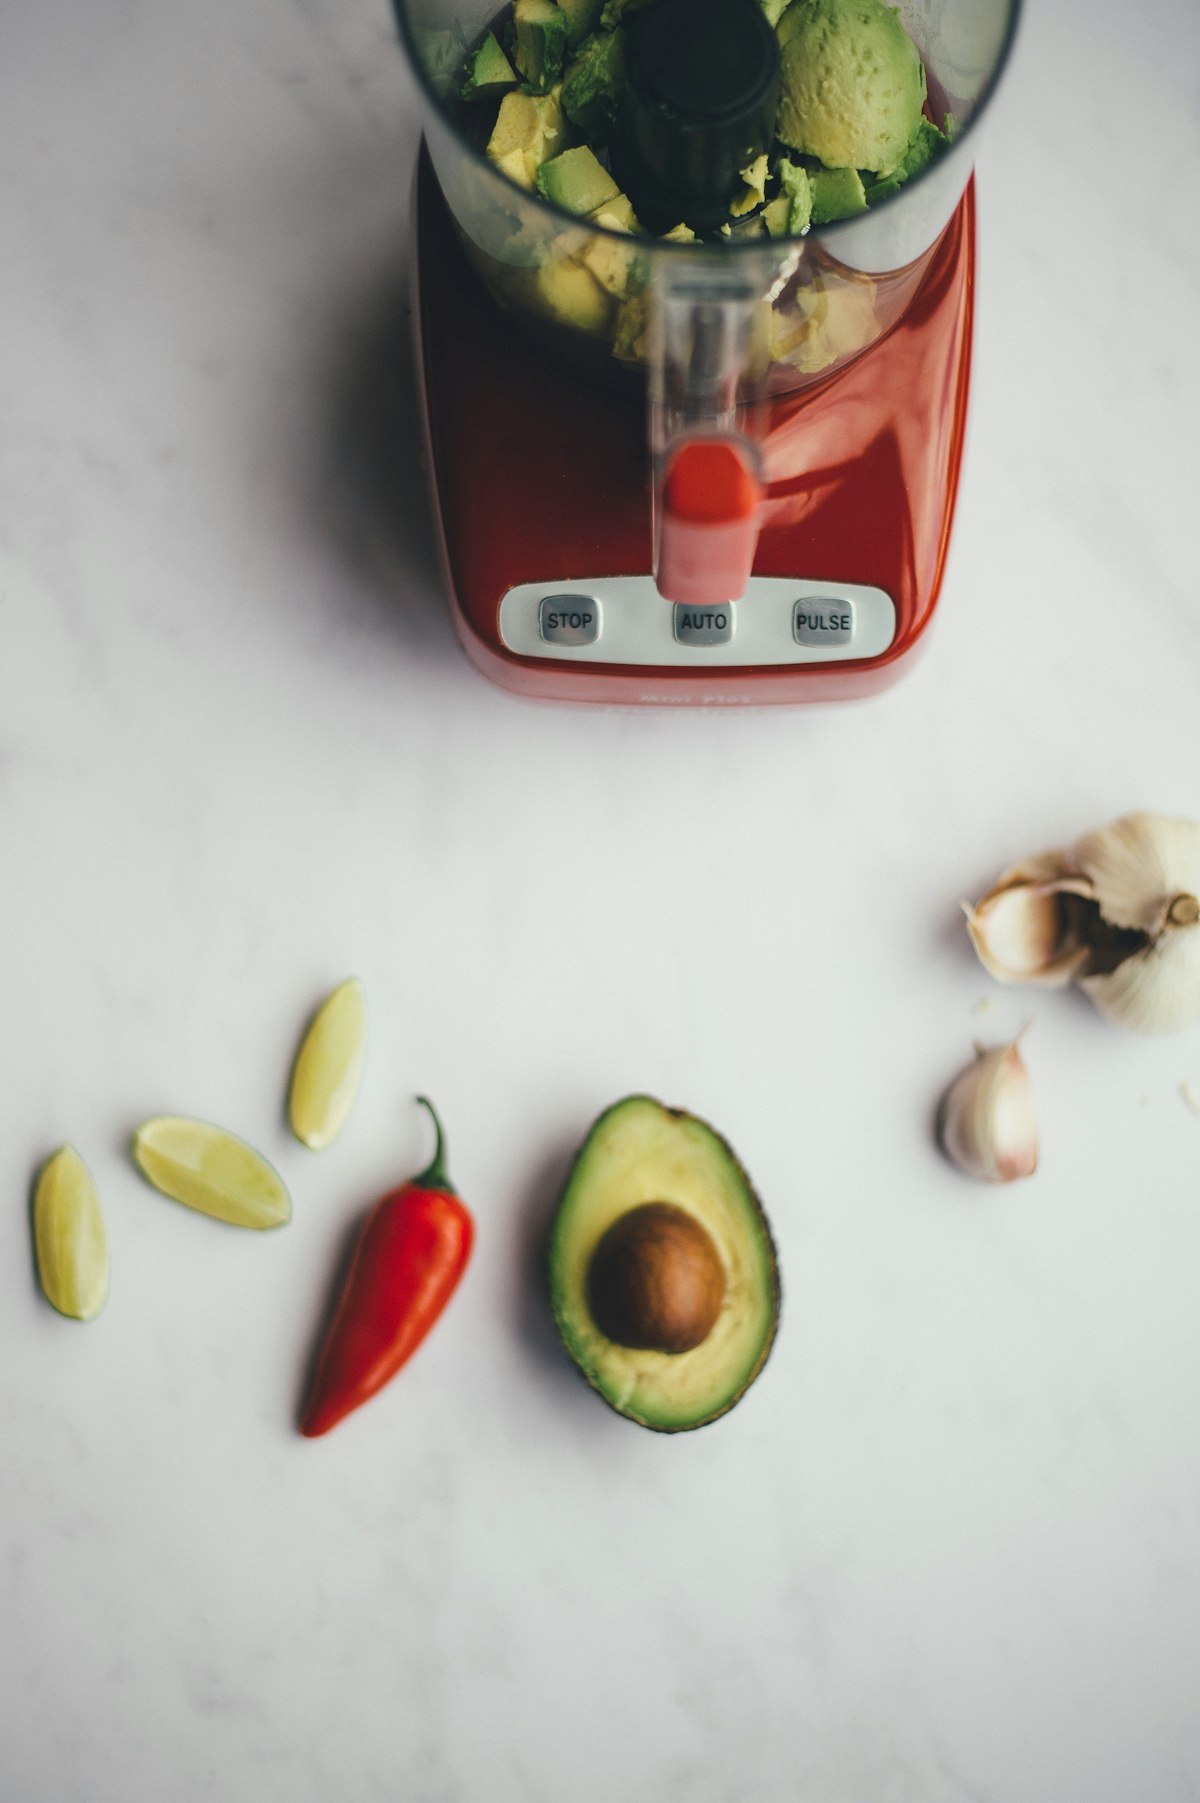 The 5 best blender food processors combos you can buy on Amazon